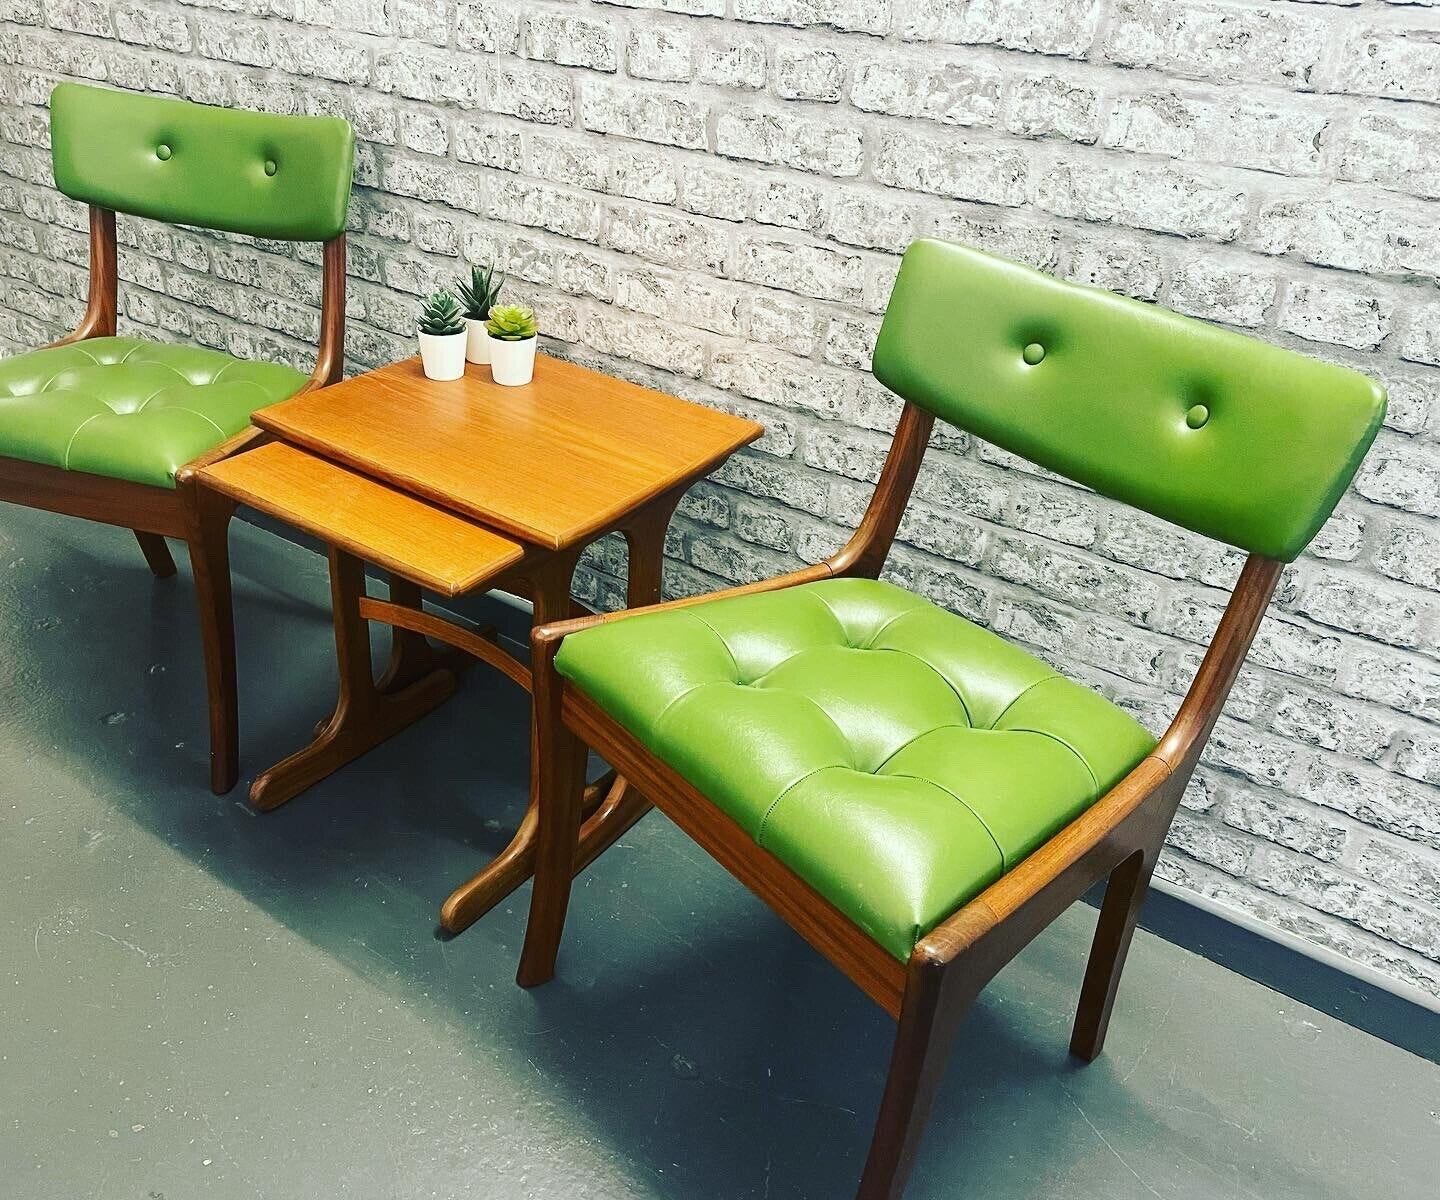 Two midcentury modern chairs with brown wood frames and glossy lime green upholstery